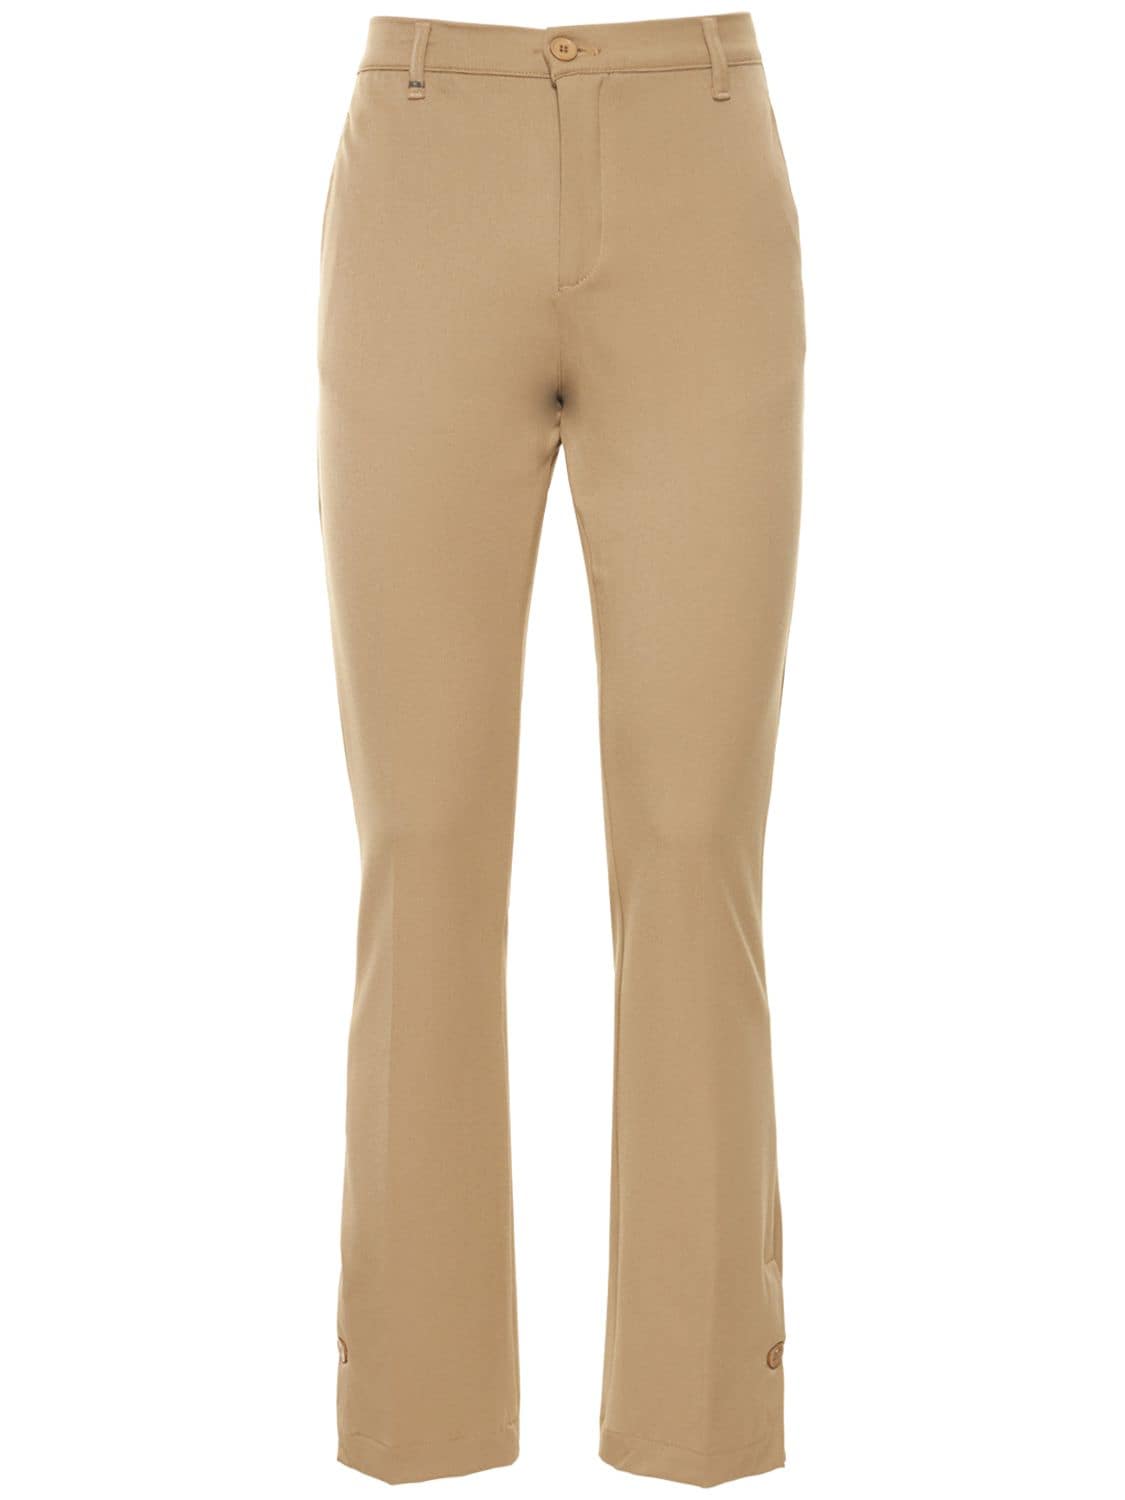 FLANEUR HOMME Pleated Viscose Blend Flared Pants